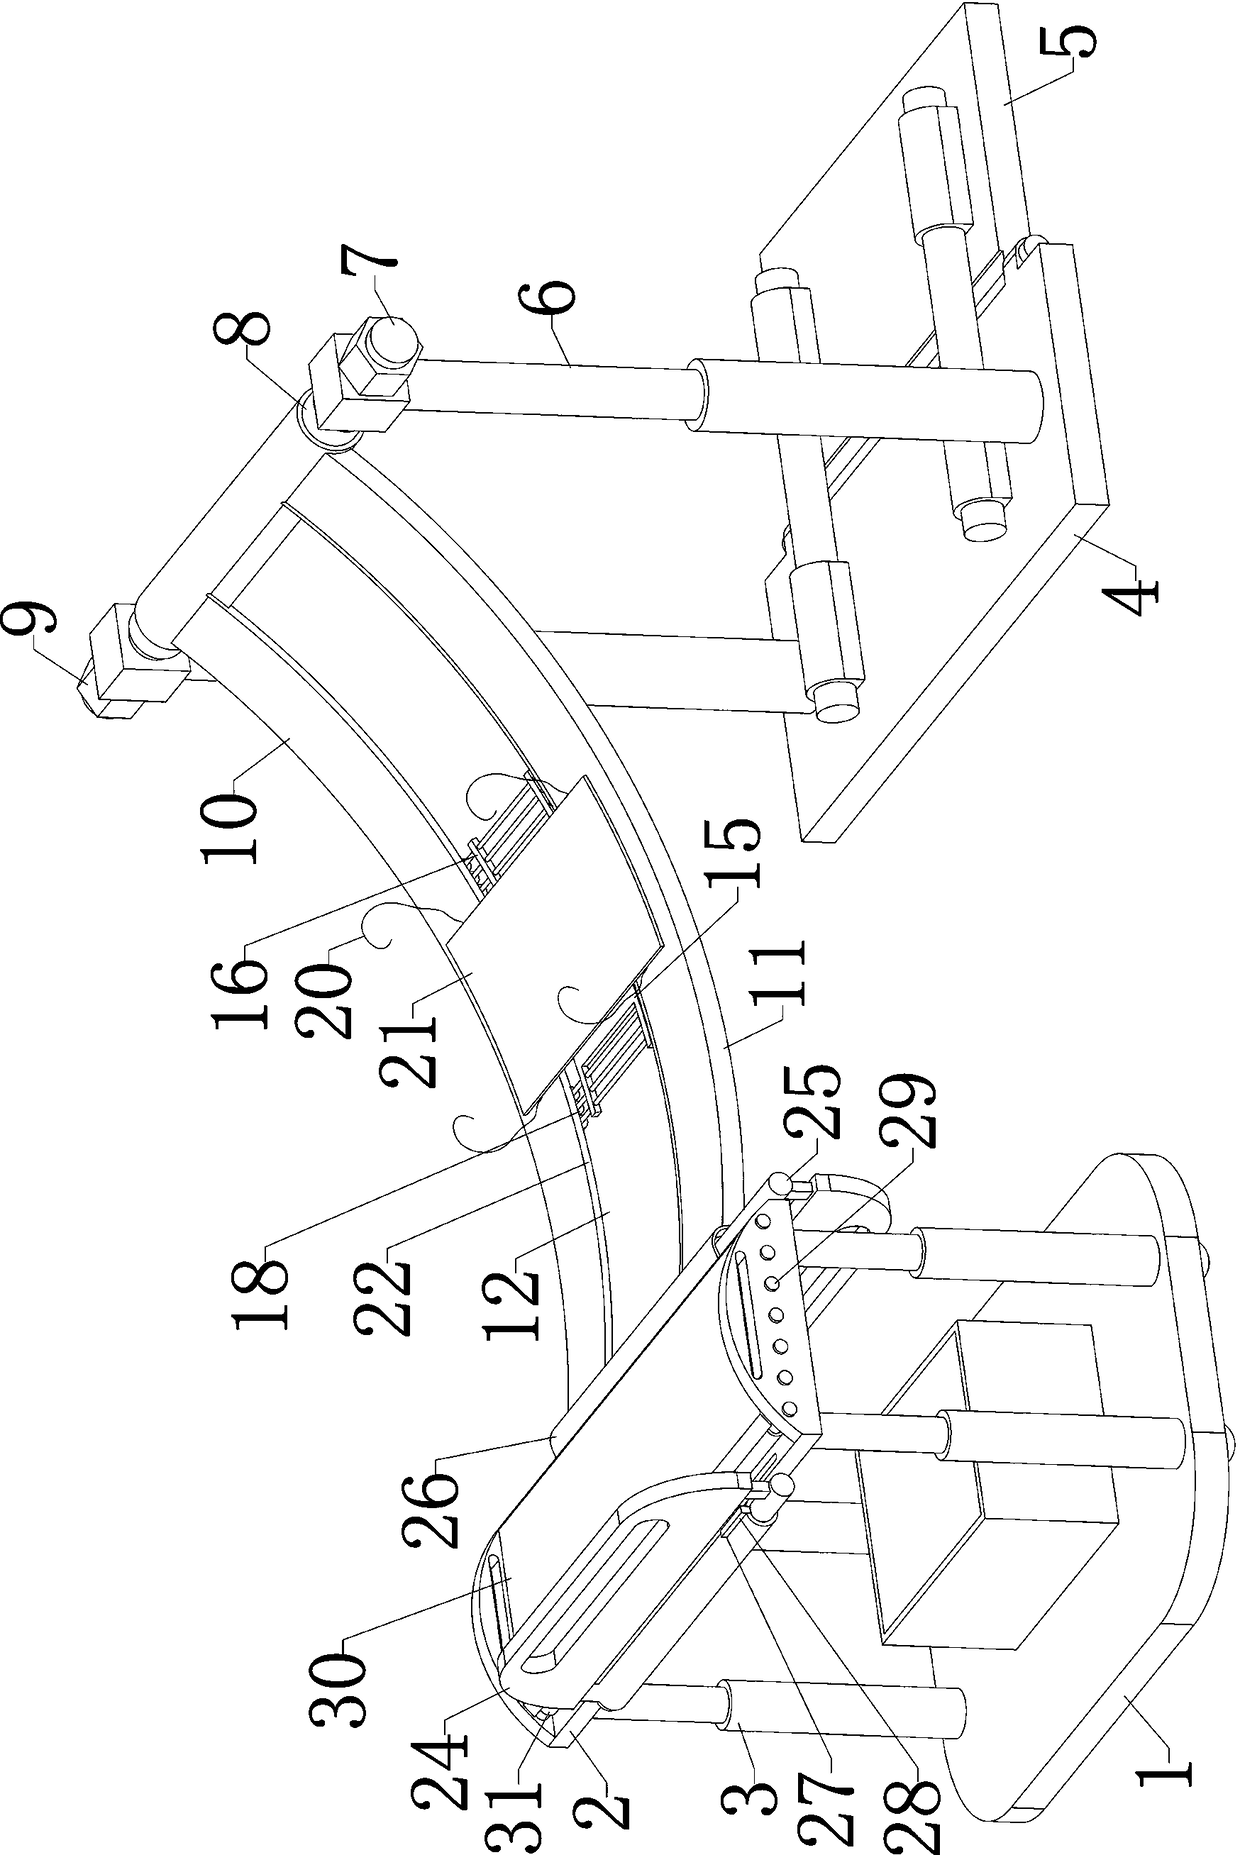 Transfer bed applicable to medical obstetric operations and predelivery